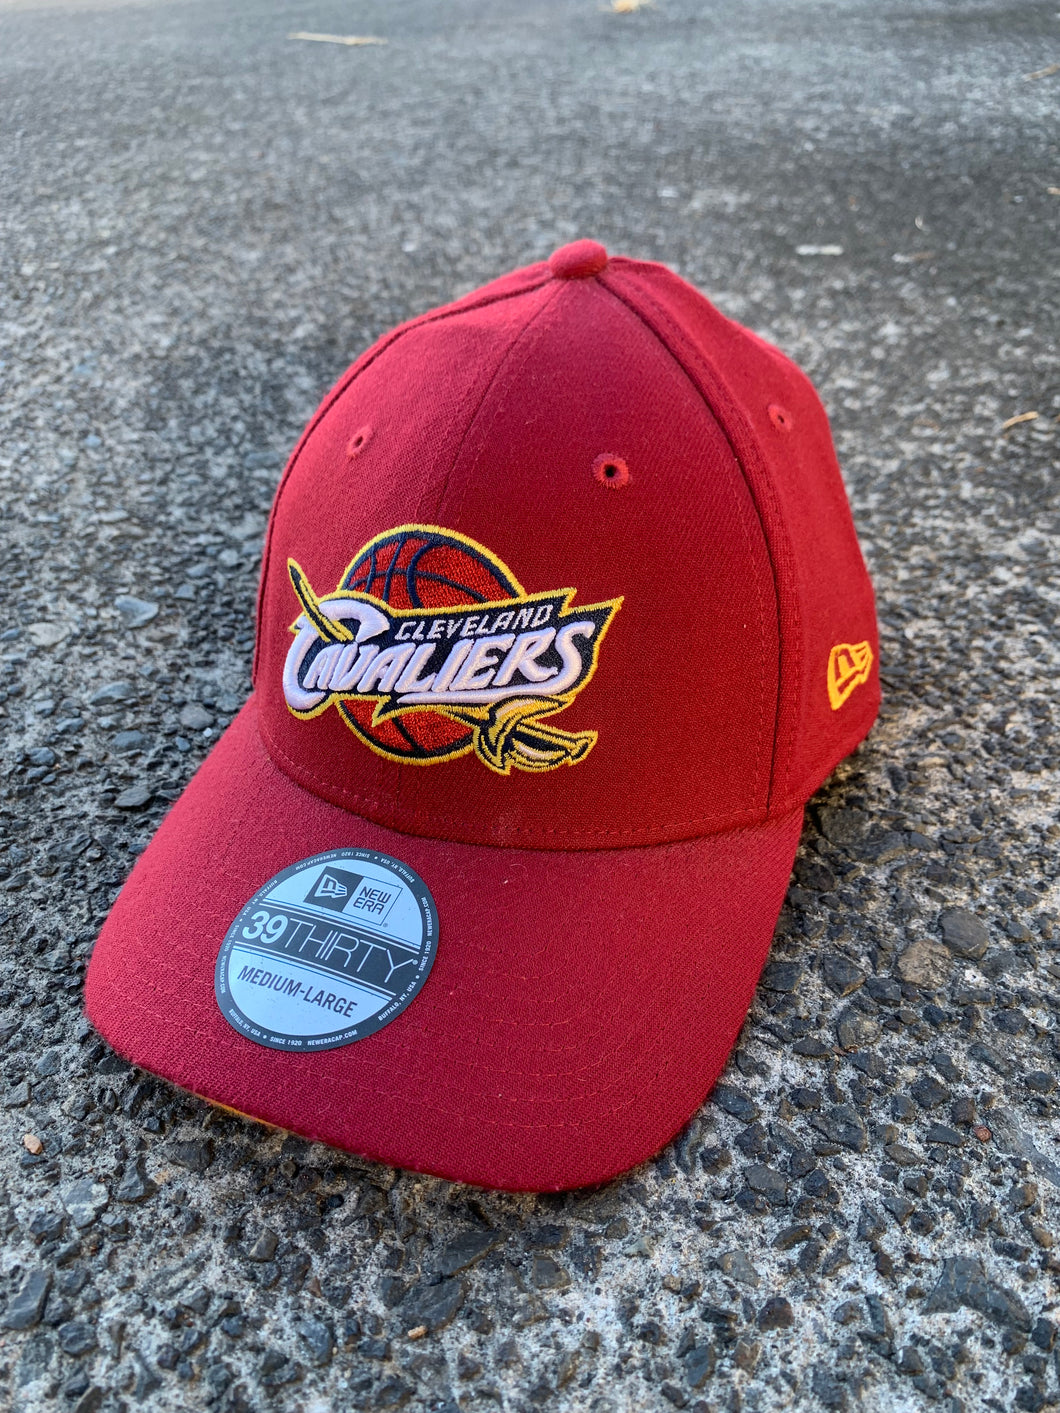 NBA - NEW AGE CLEVELAND CAVALIERS FITTED HAT  - MEDIUM / LARGE